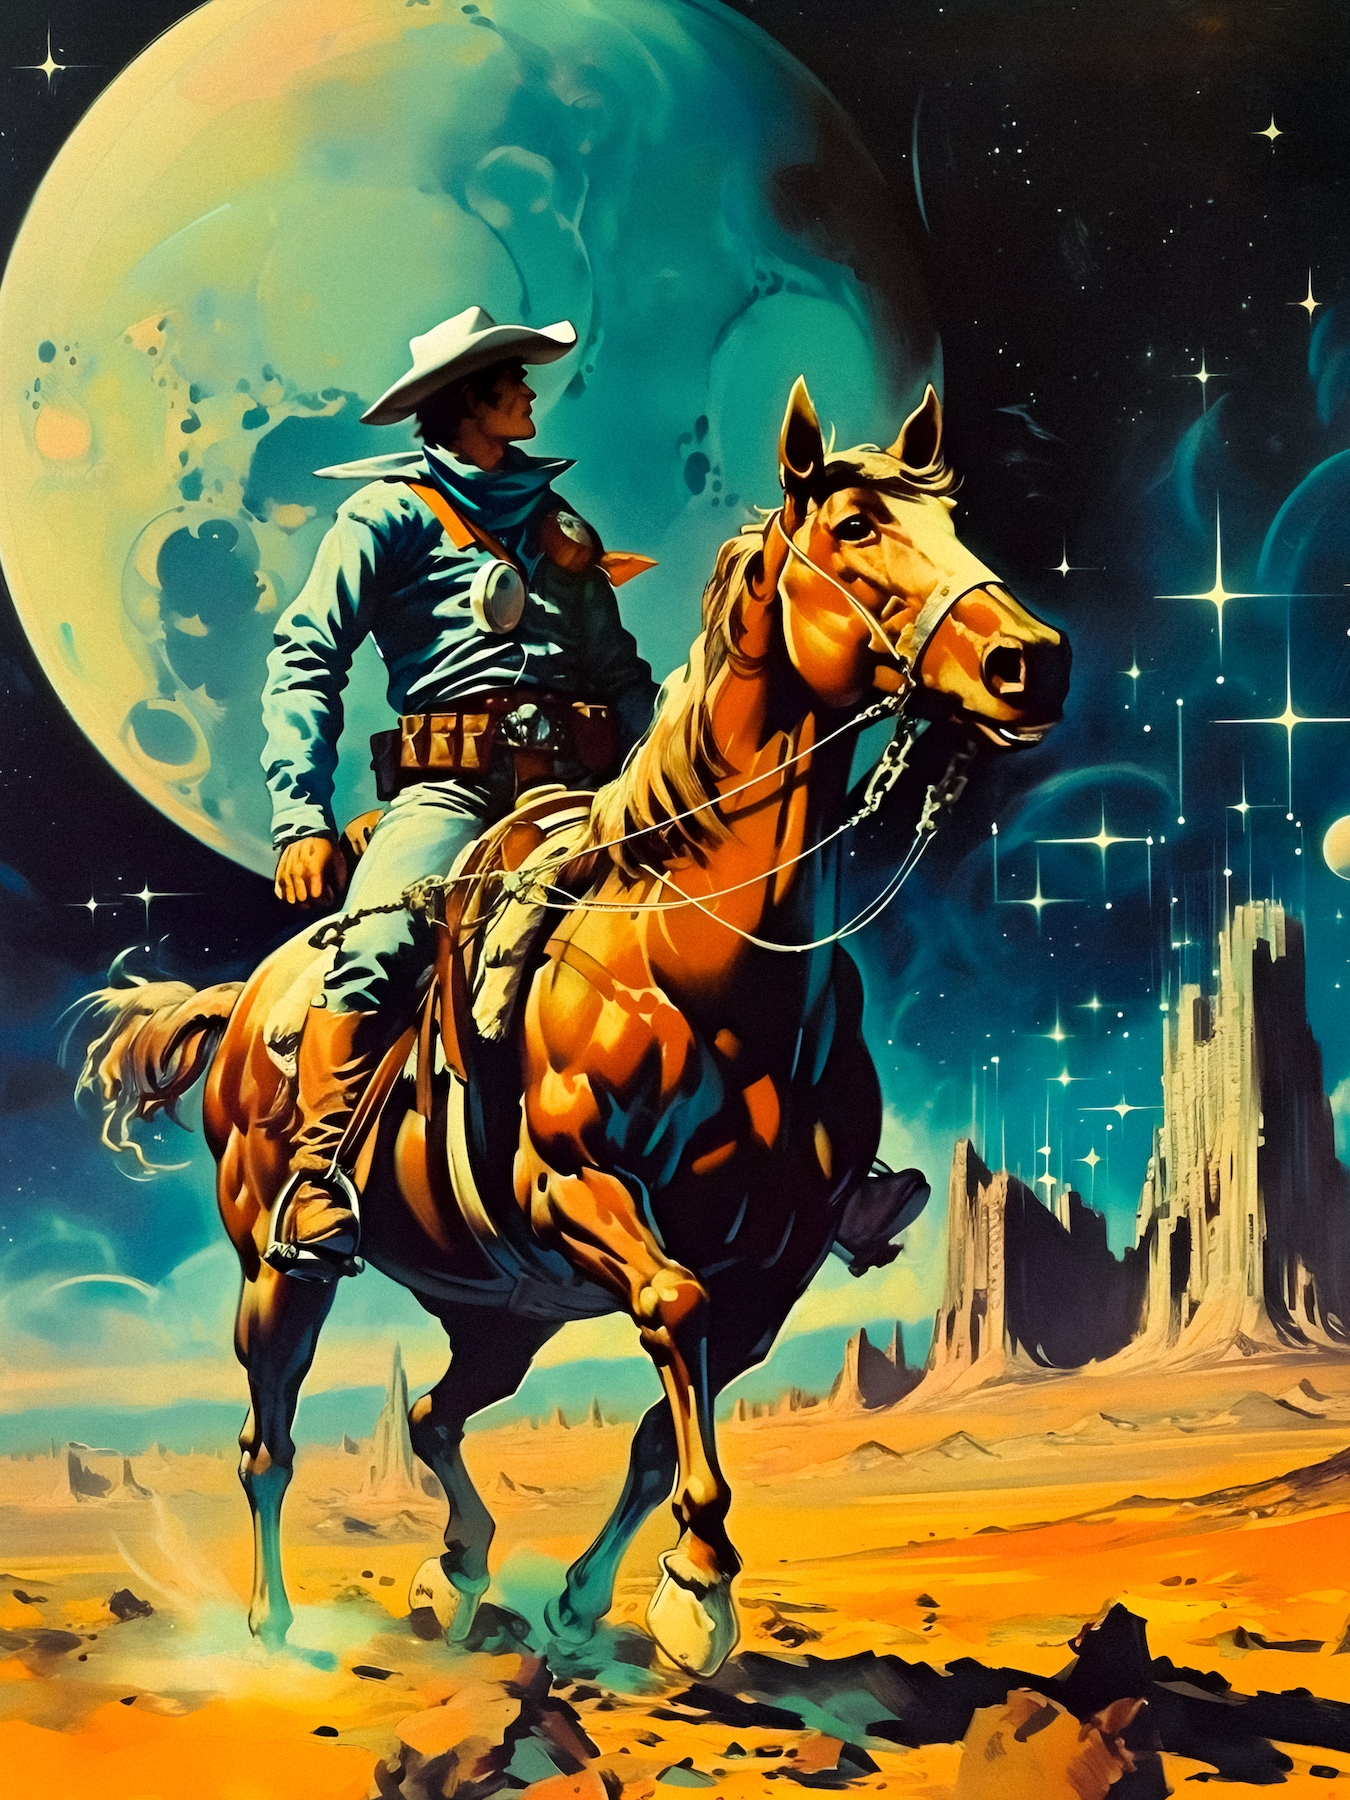 The Space Cowboy Wallpaper - Buy High-Quality Wallpapers Online | Happywall